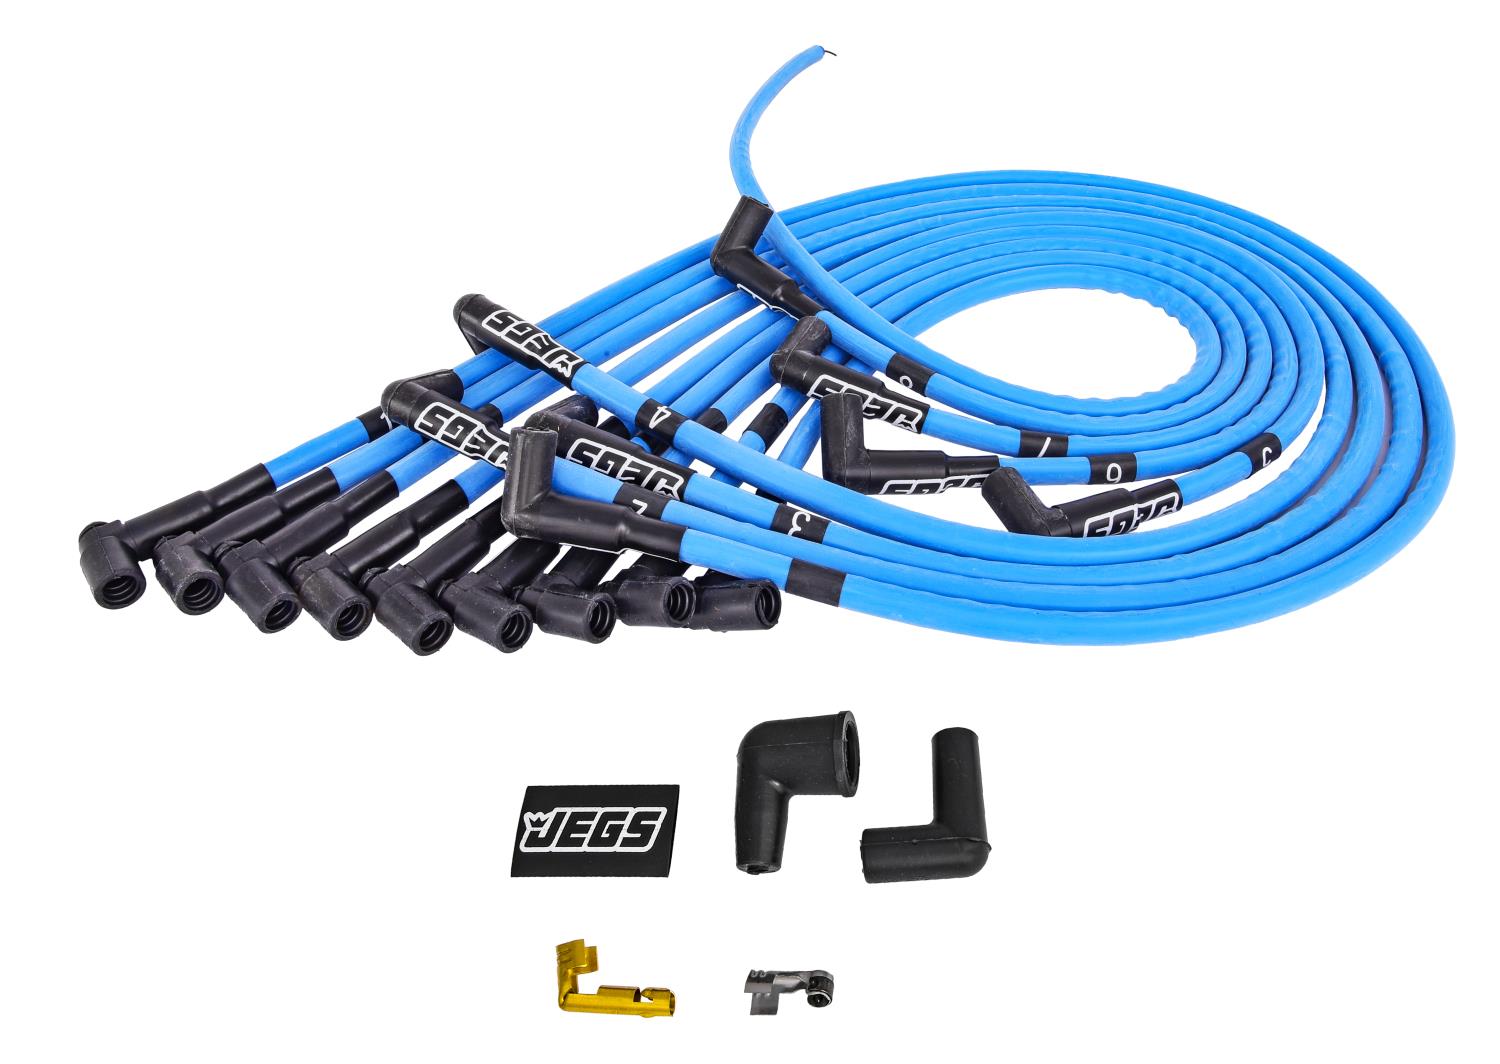 8mm Hi-Temp Sleeved Spark Plug Wire Set for Big Block Chevy 396, 402 & 454 w/HEI, Under Header w/90-degree Boots [Blue]